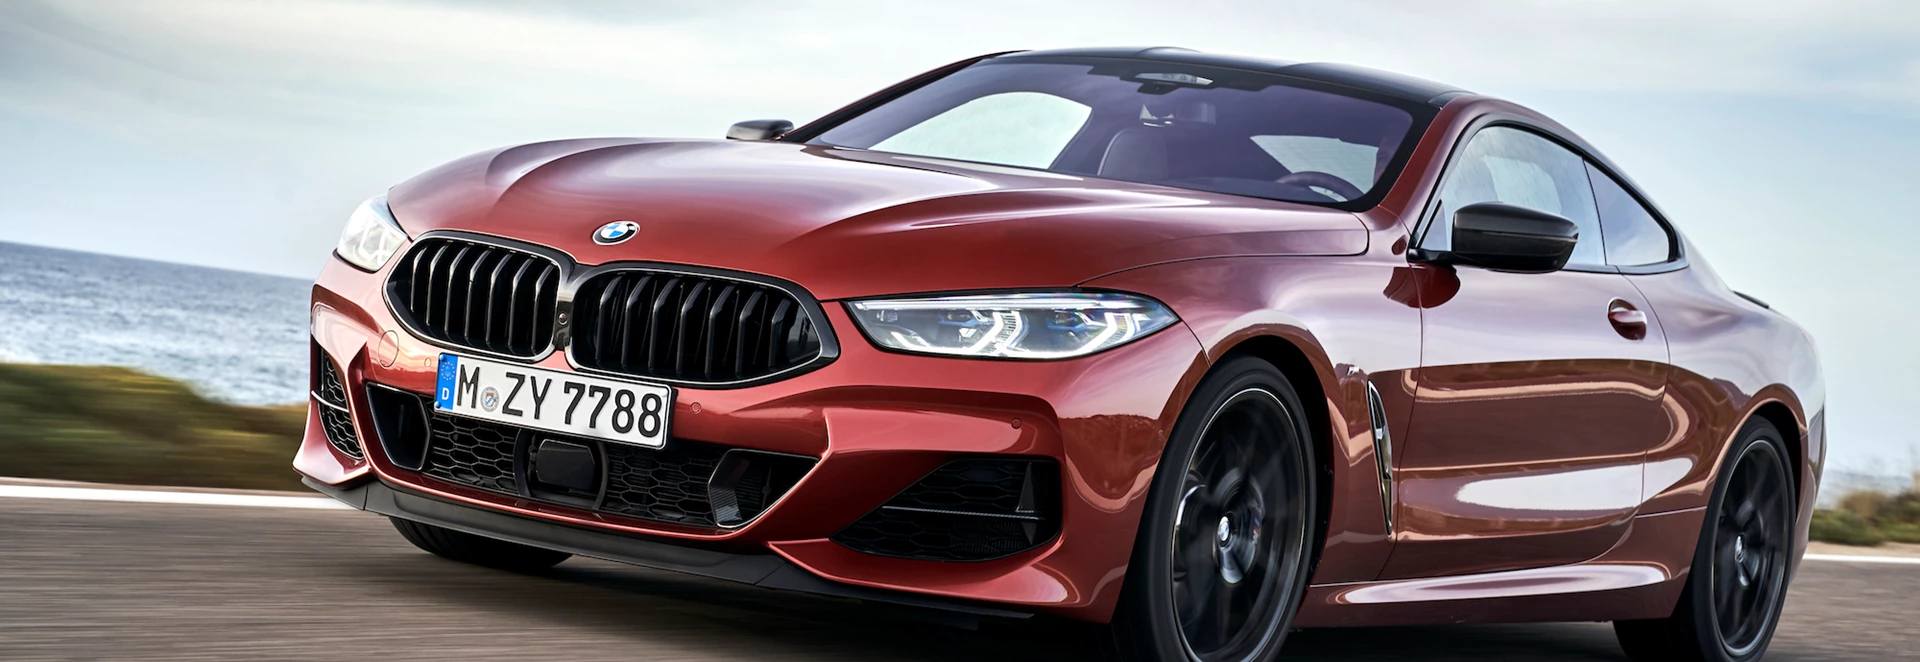 2018 BMW 8 Series review